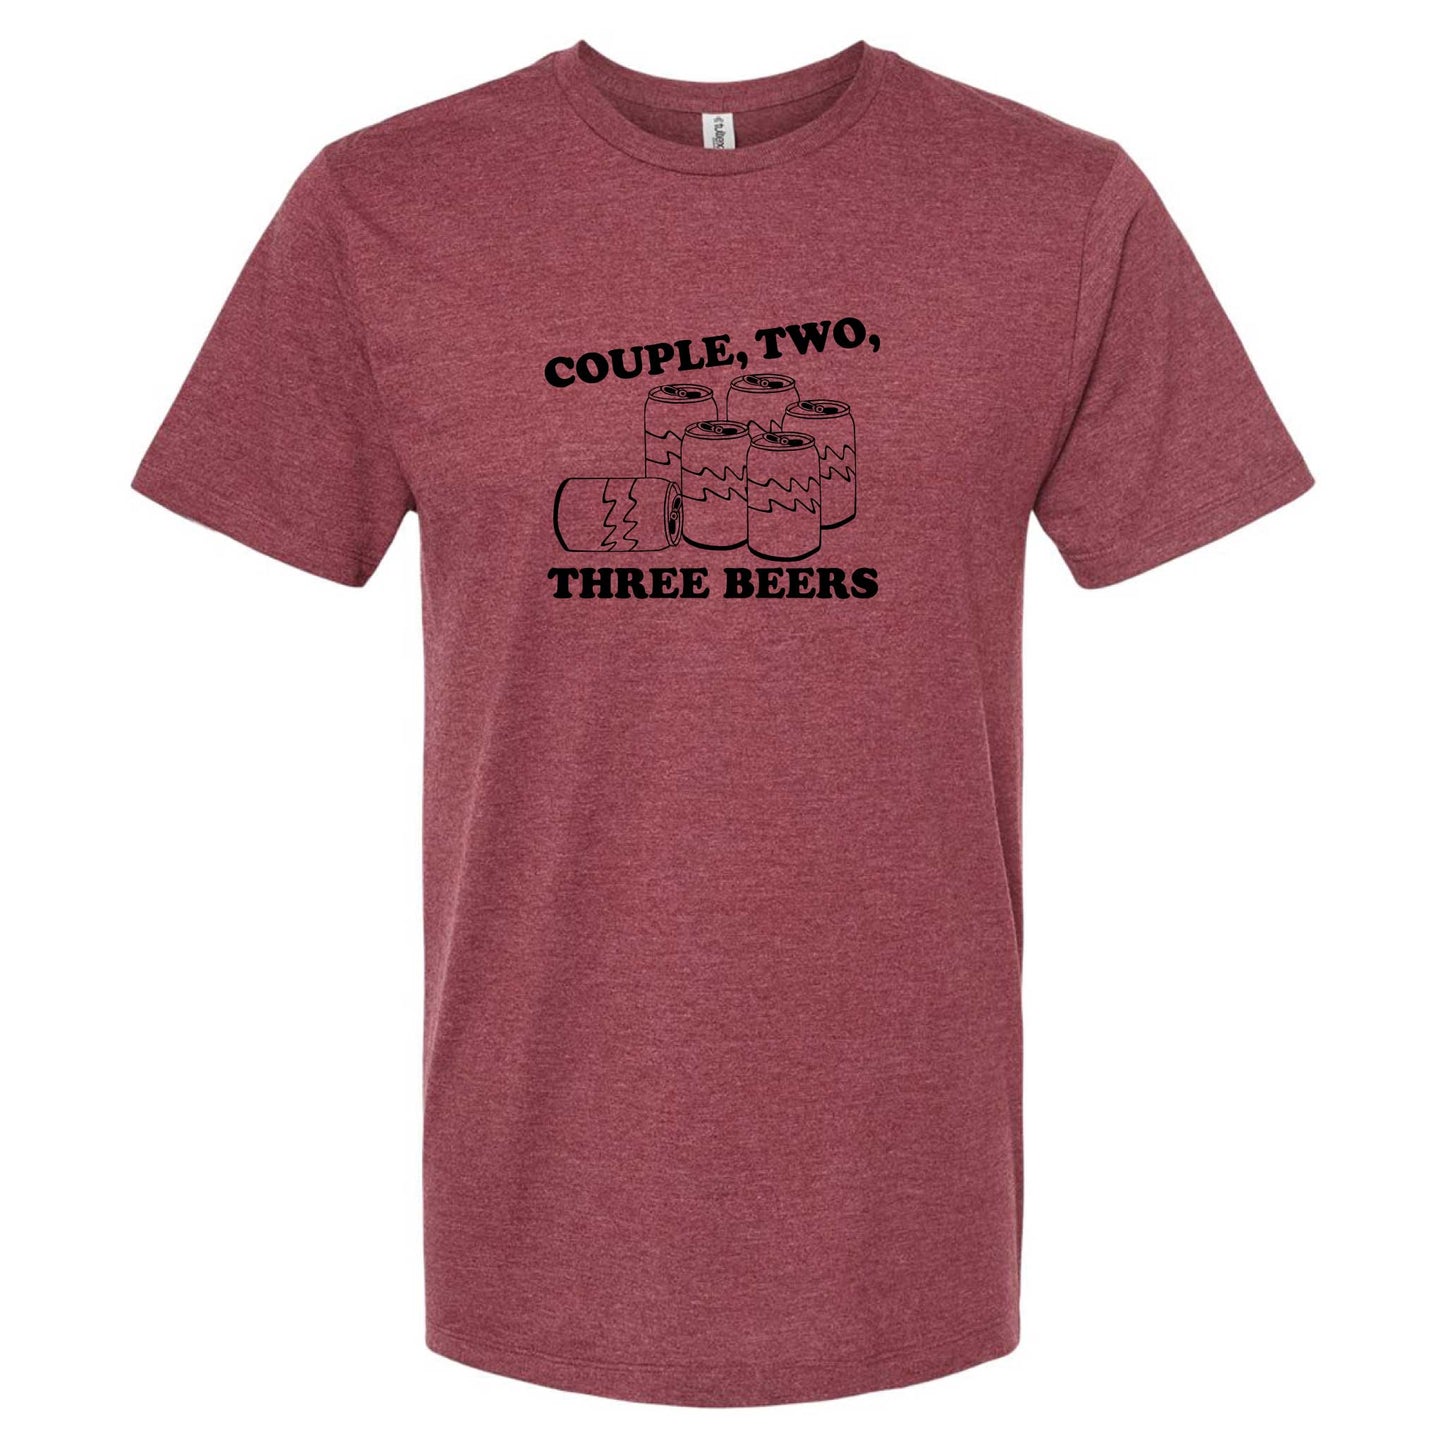 Couple, Two, Three Beers T-Shirt